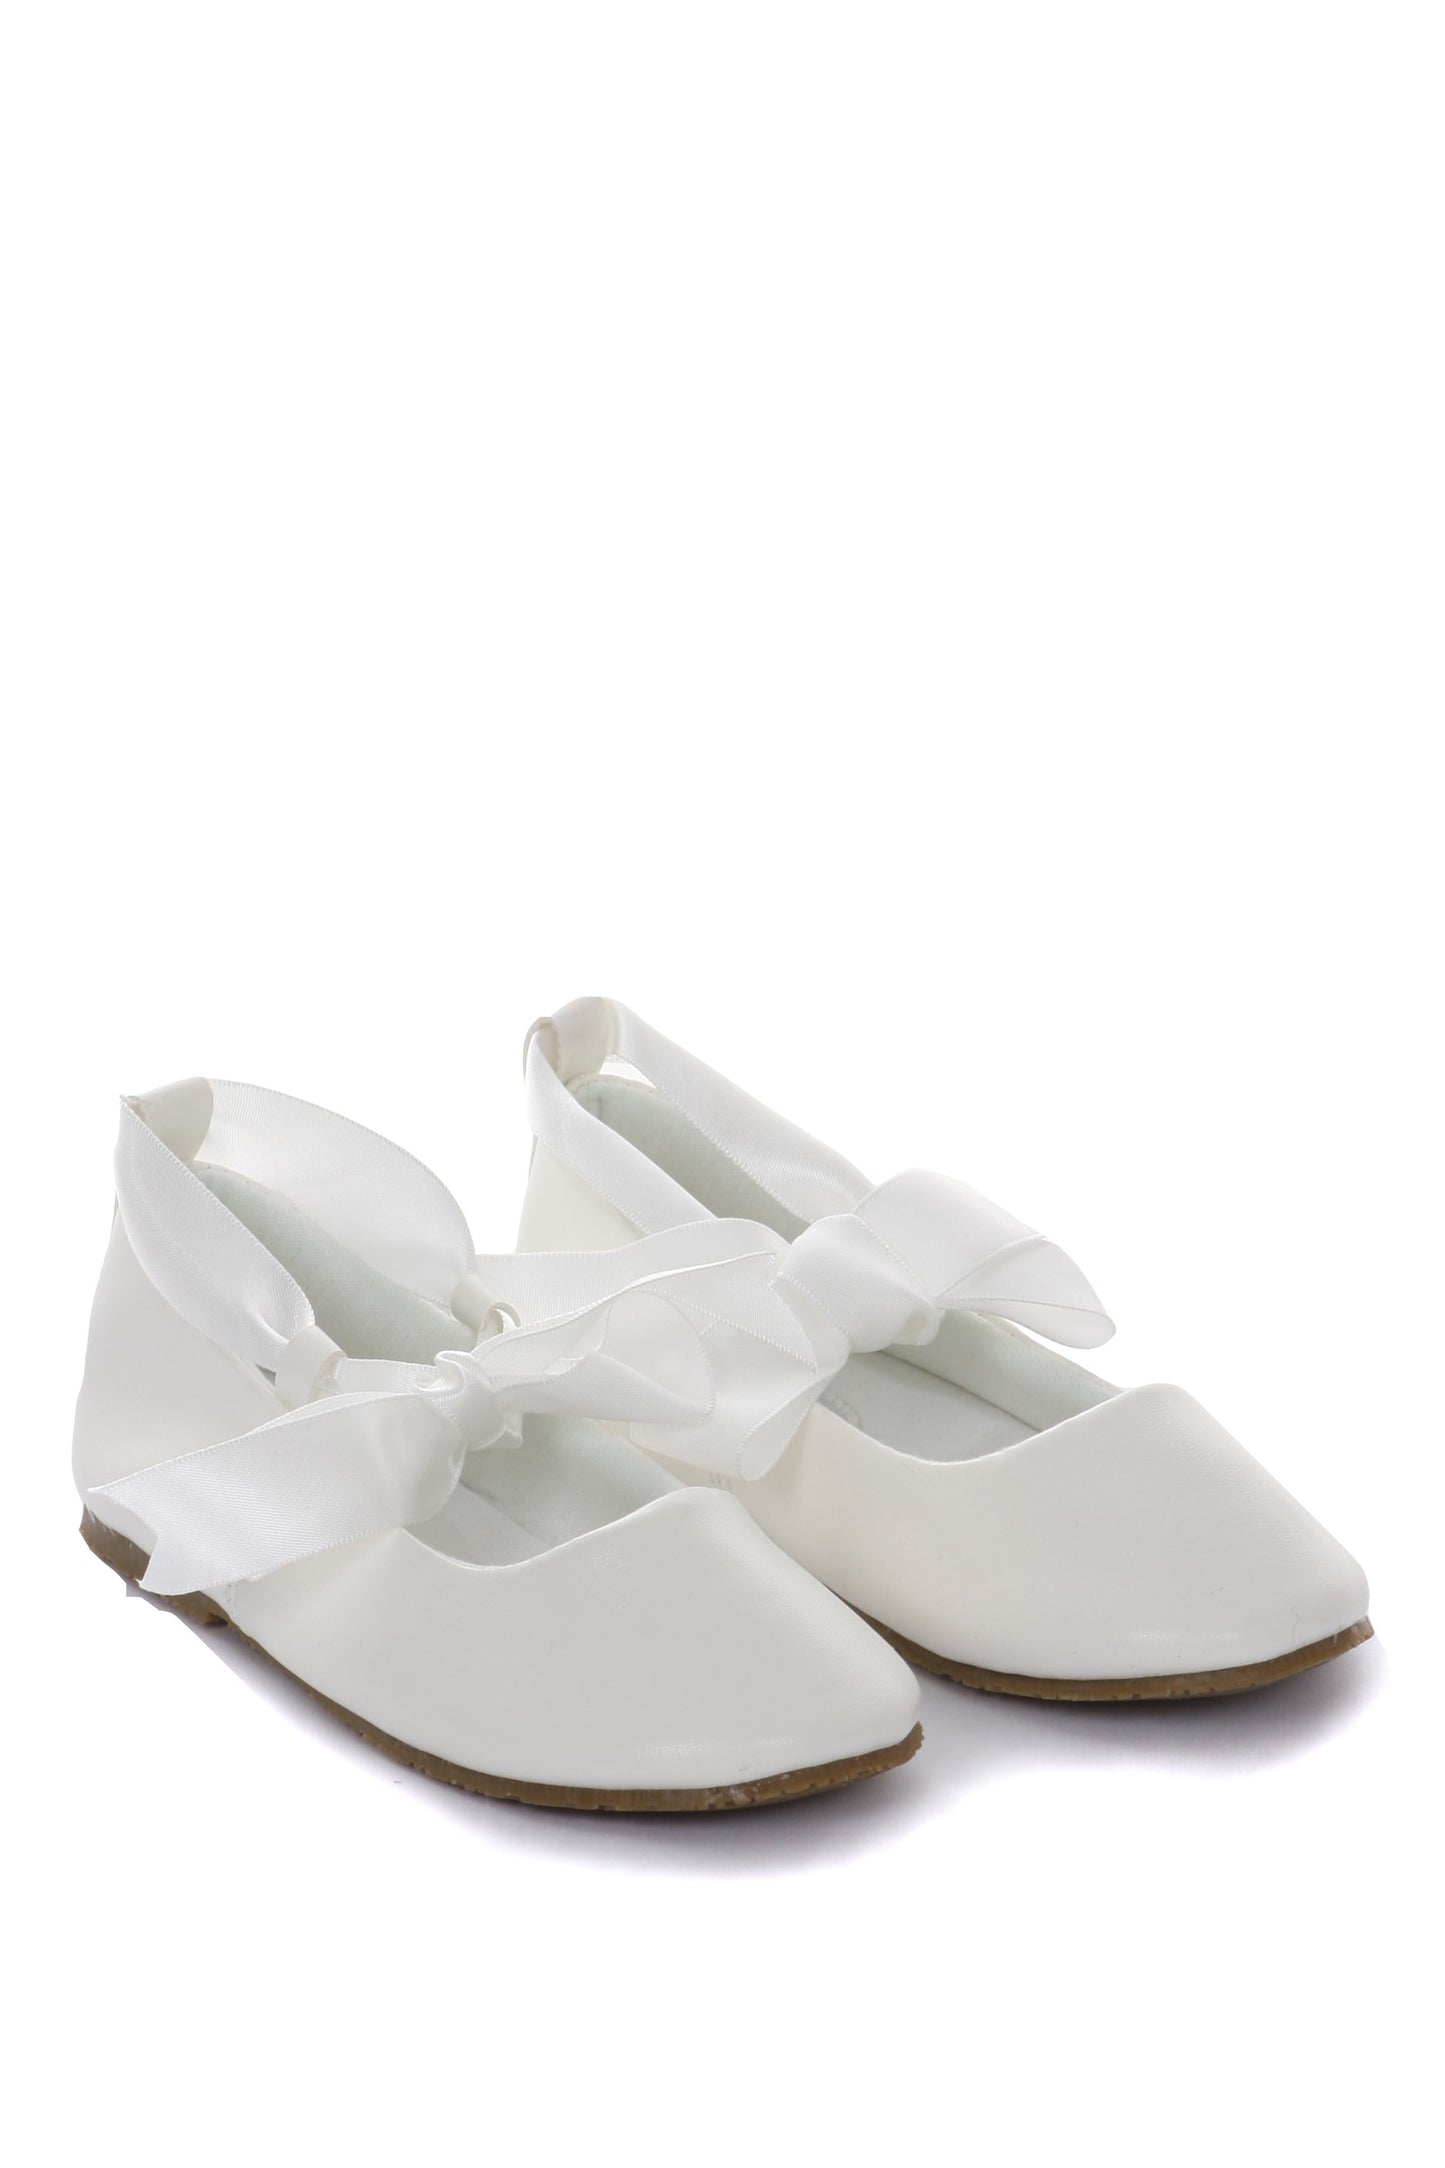 Shoes - Ballerina Shoes W/ Ribbon Tie